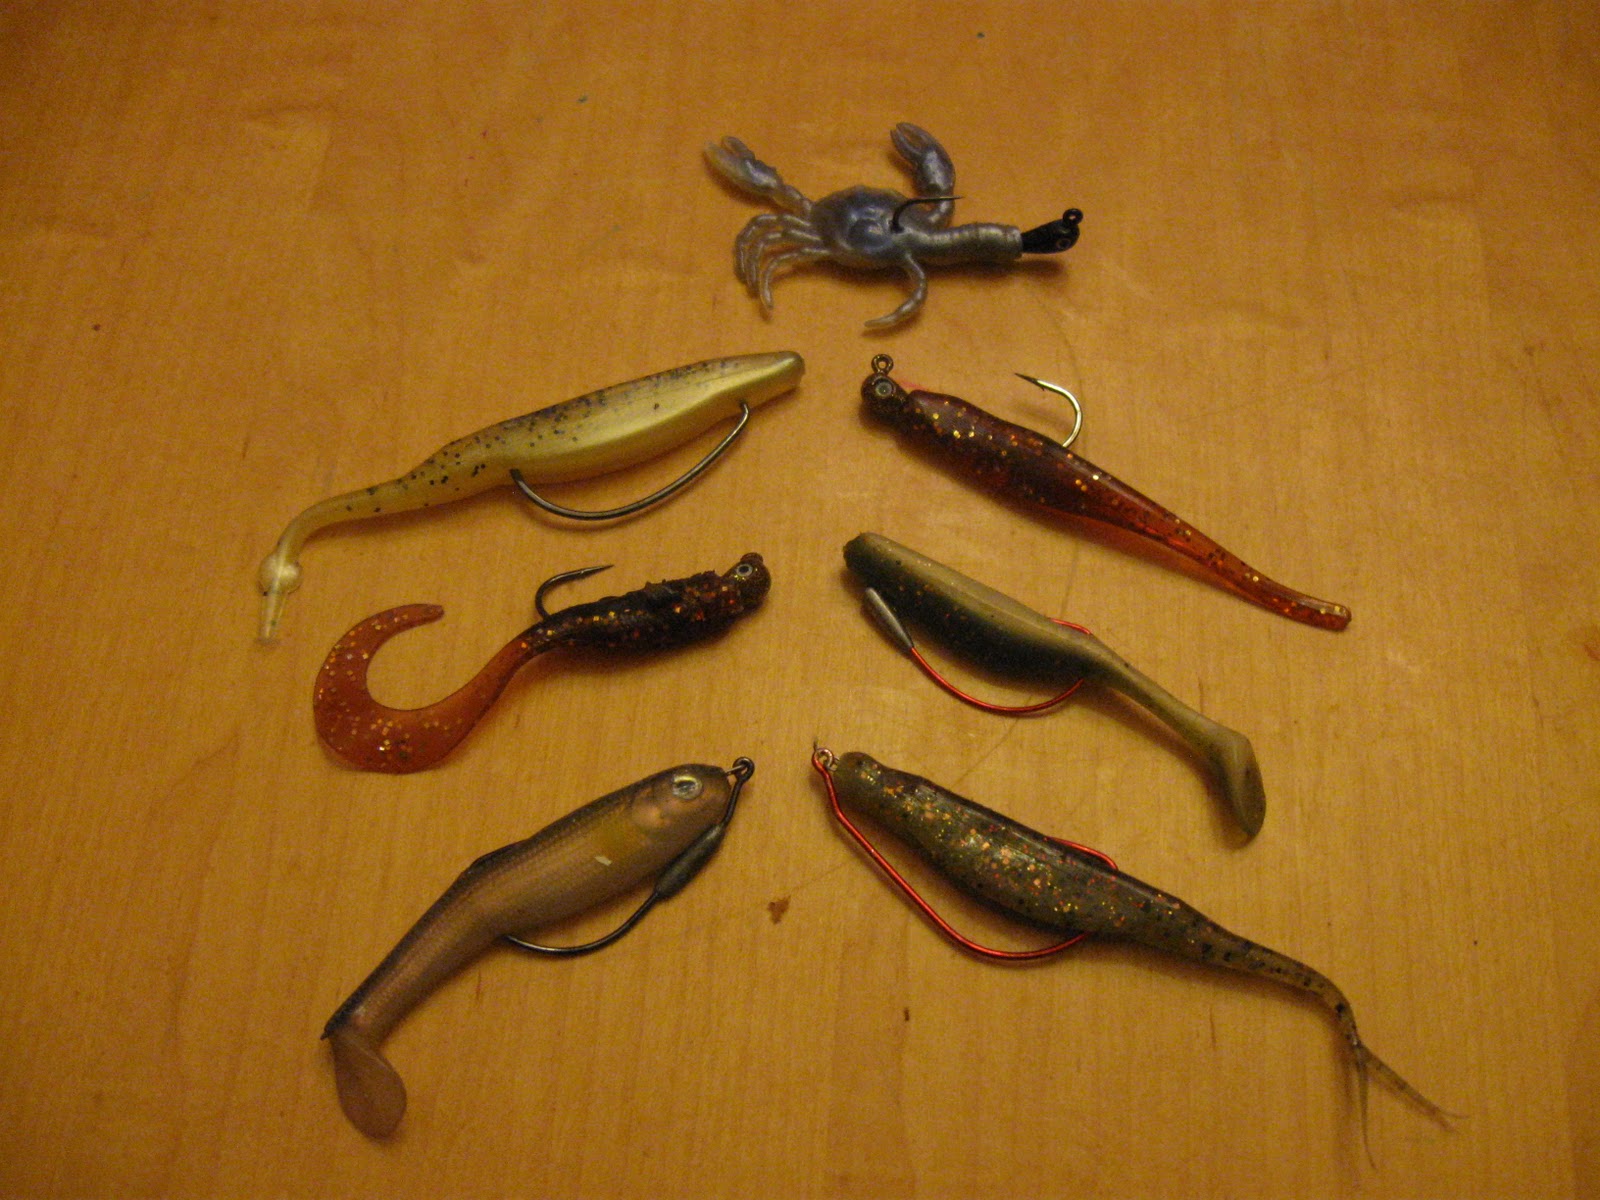 Best lures for redfish